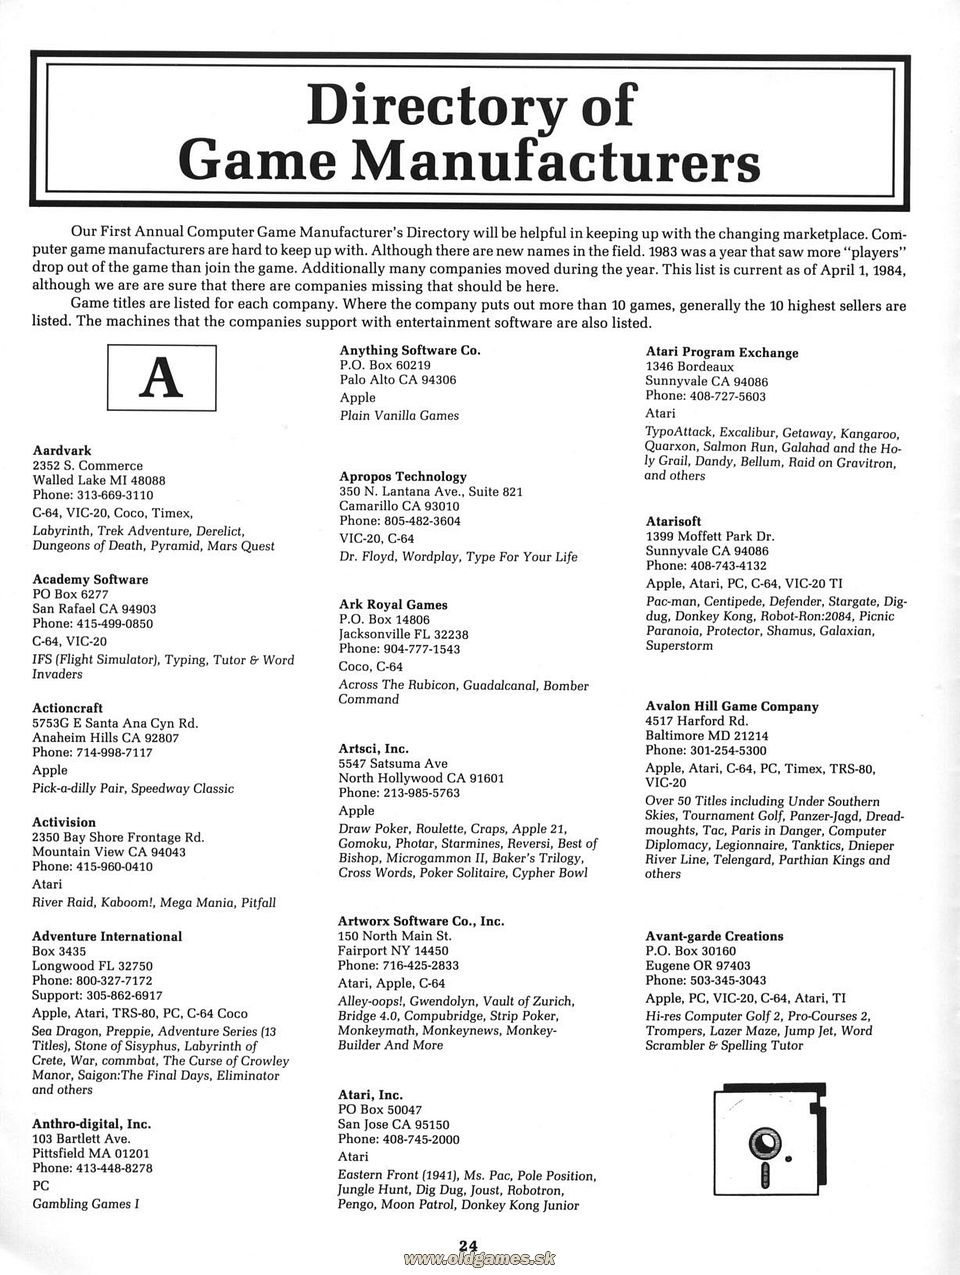 Directory of Game Manufacturers: A